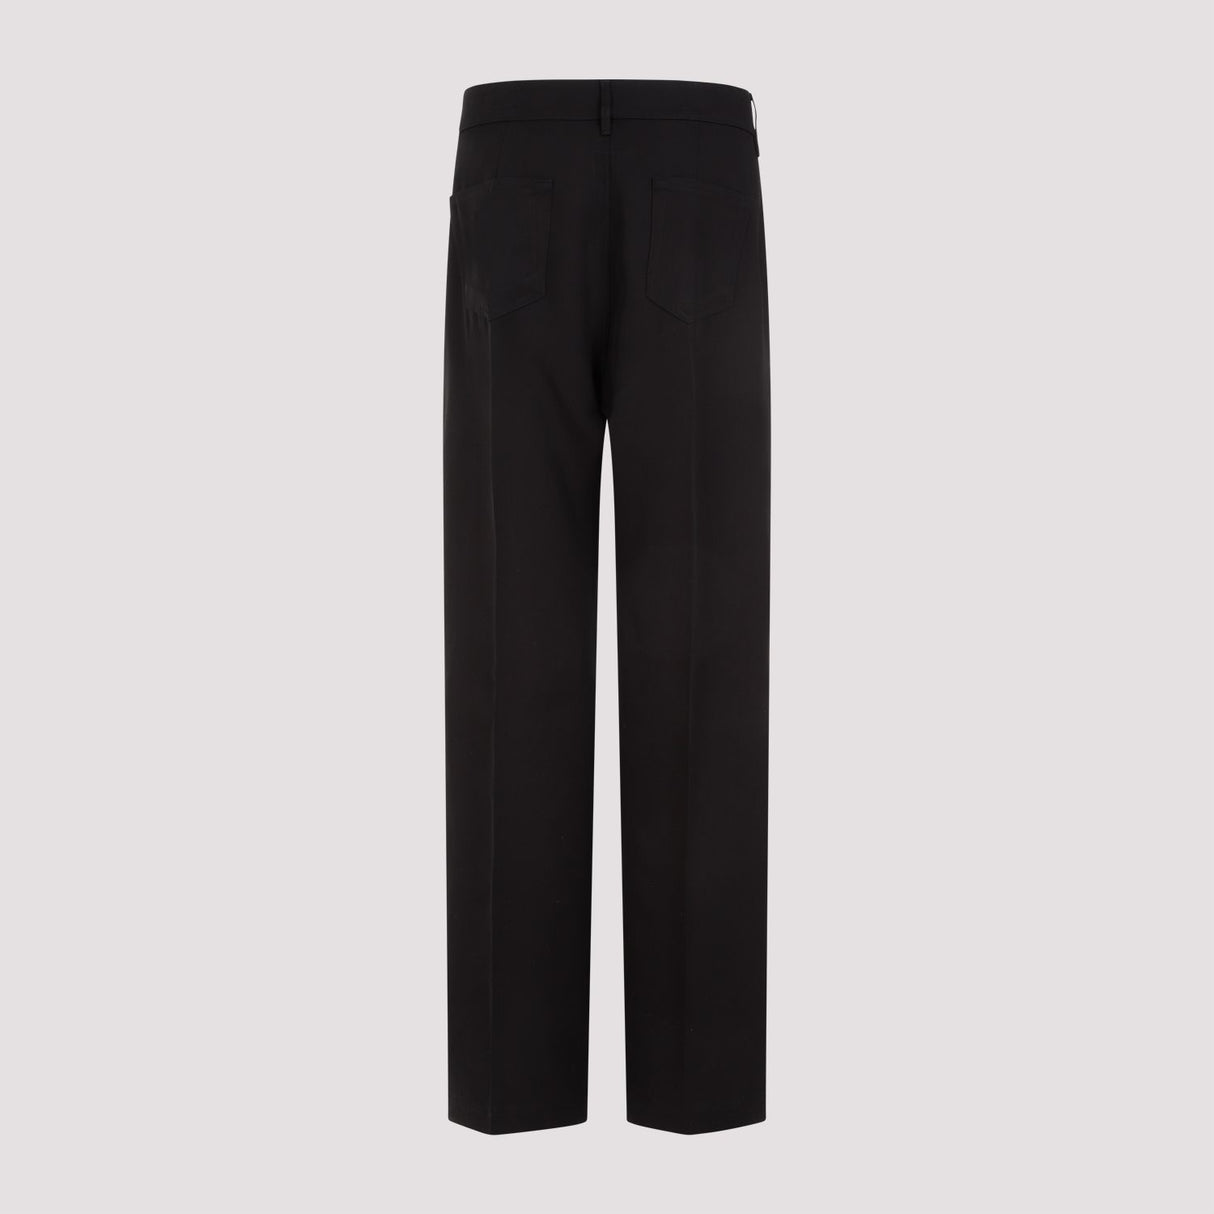 RICK OWENS Iconic Black Silk and Wool Jeans for Men